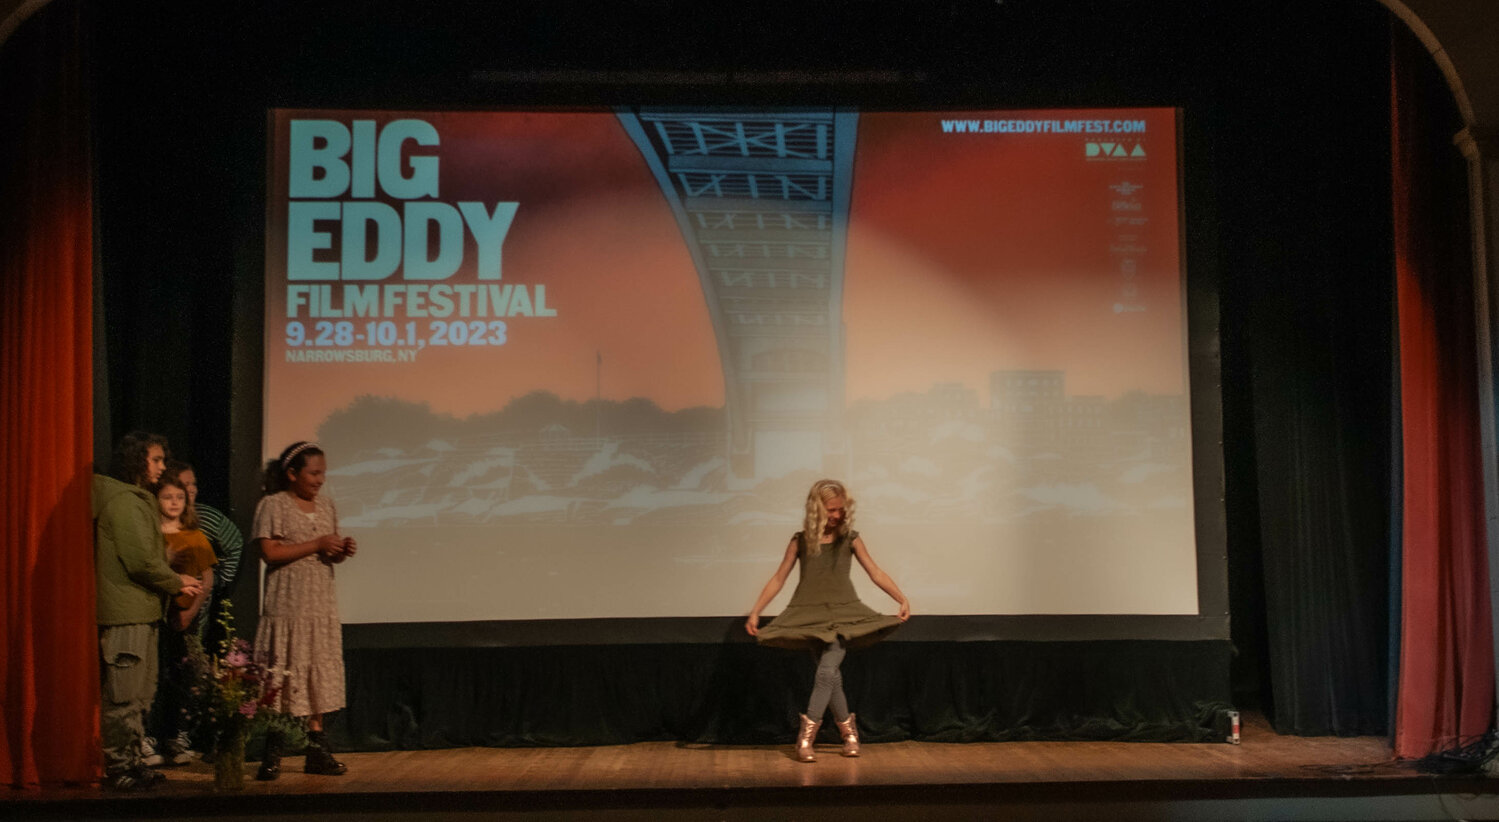 All the students who participated in the Kids Make Film series presented during the Big Eddy Film Festival should take a bow, as Sullivan West Elementary School's Olivia did last weekend after the screening of "Why?".